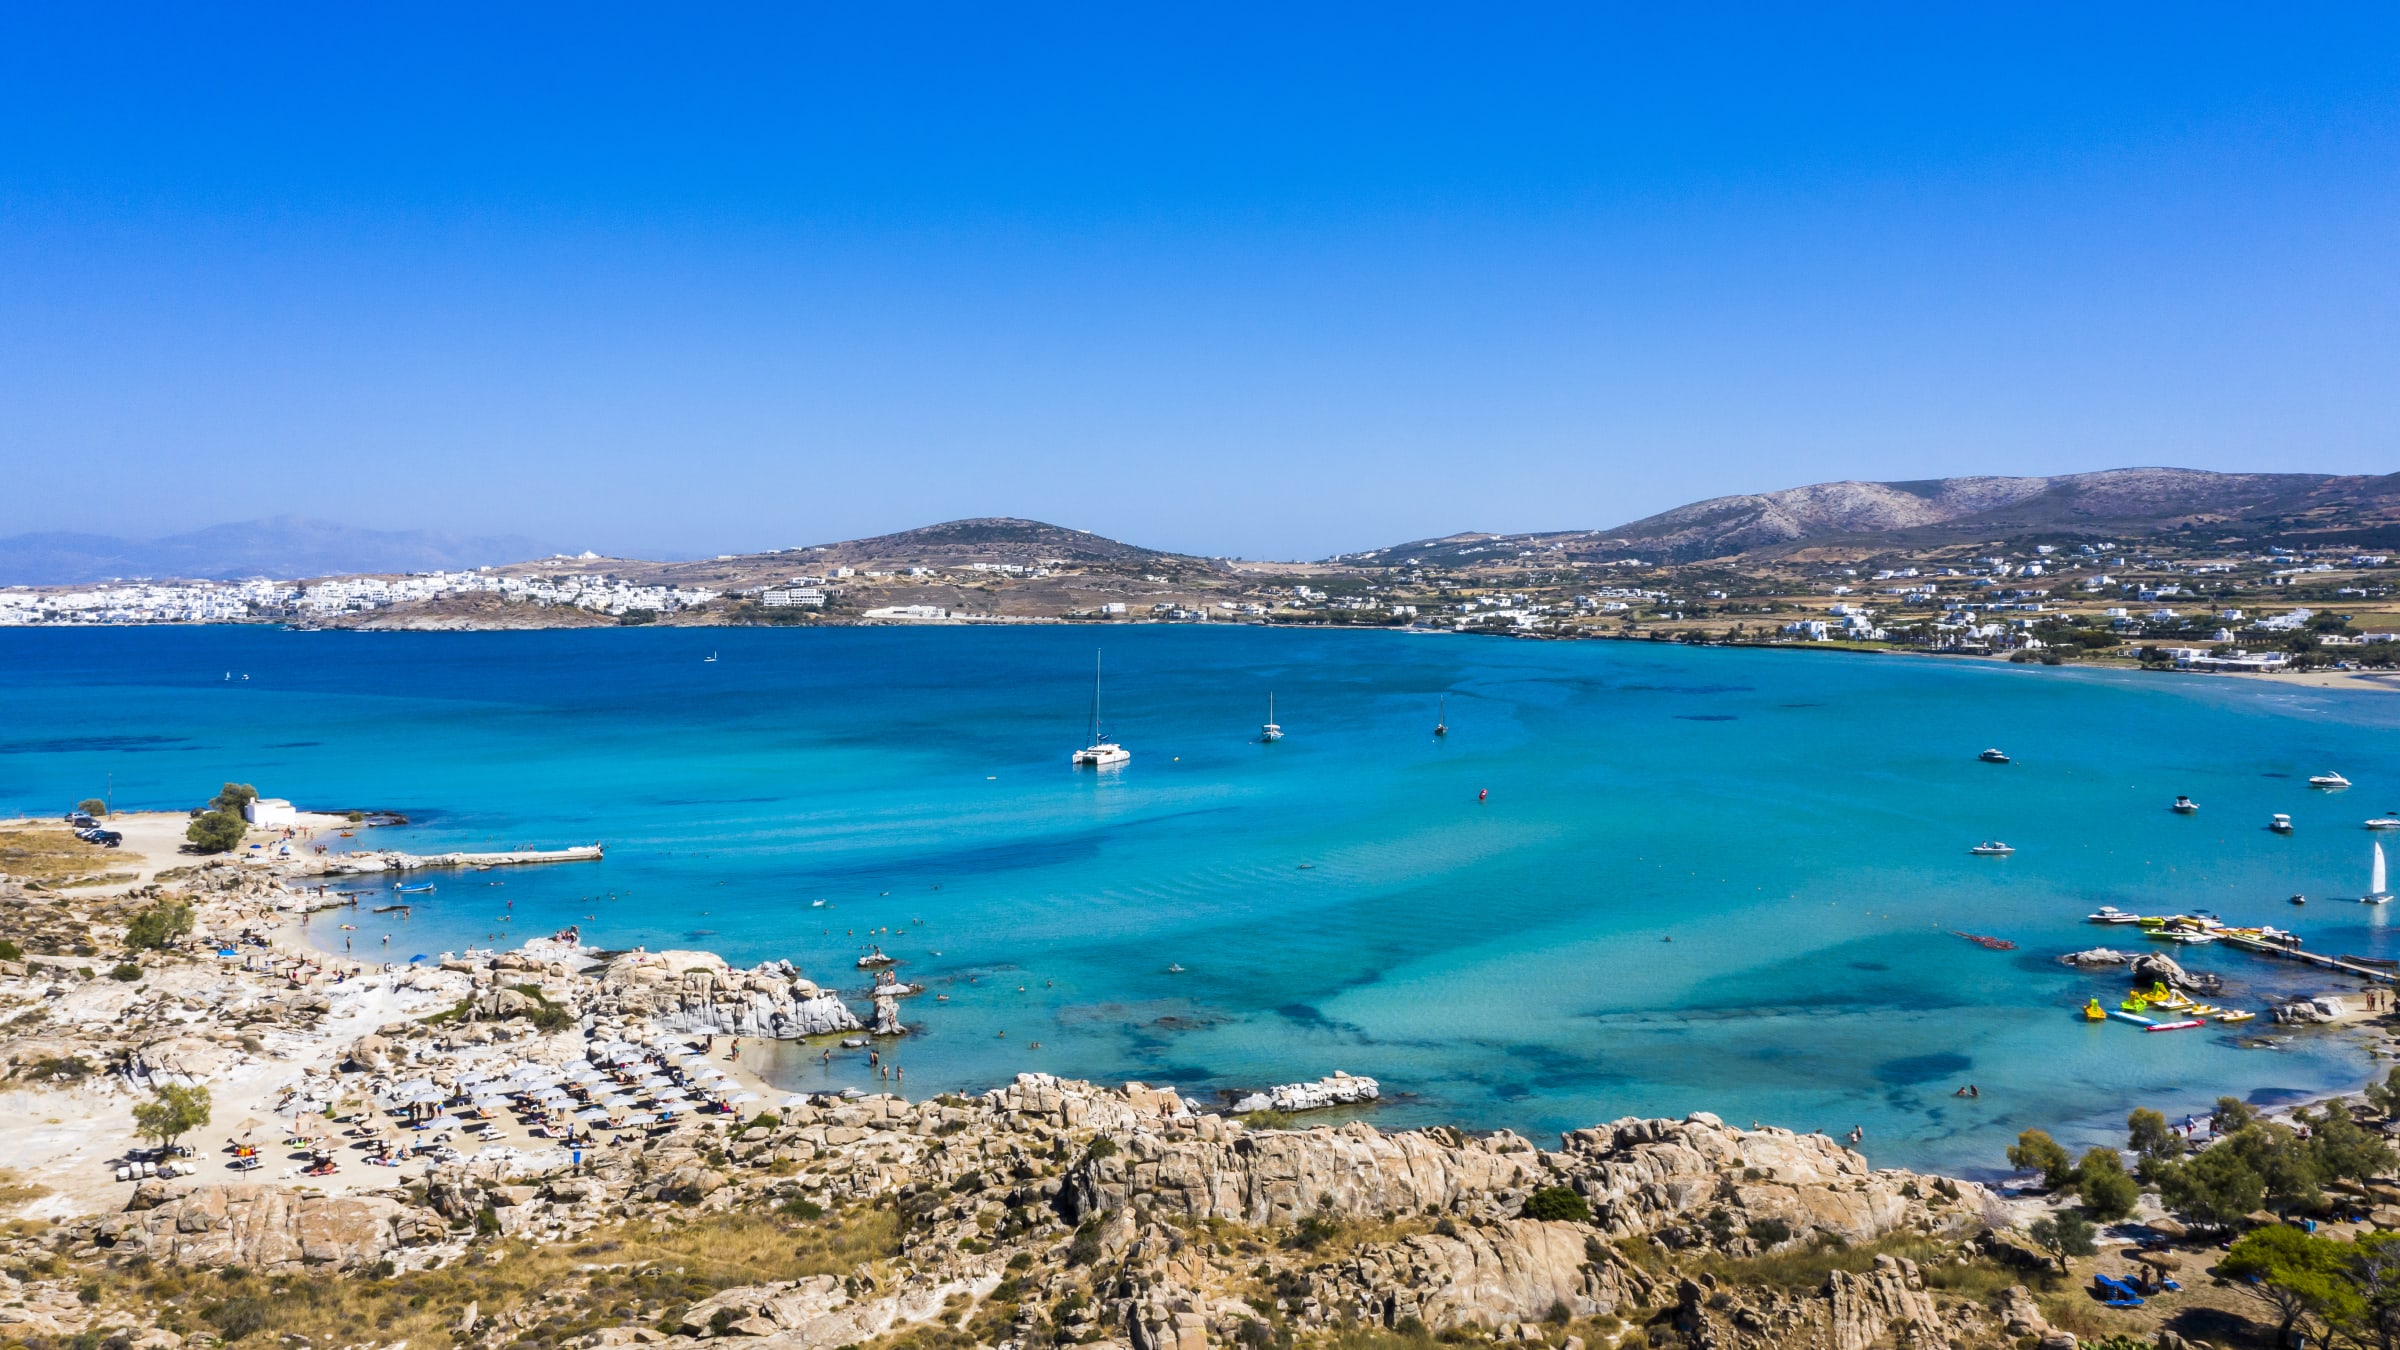 Paros, One of Greeces Most Popular Islands, Has a Secret Side